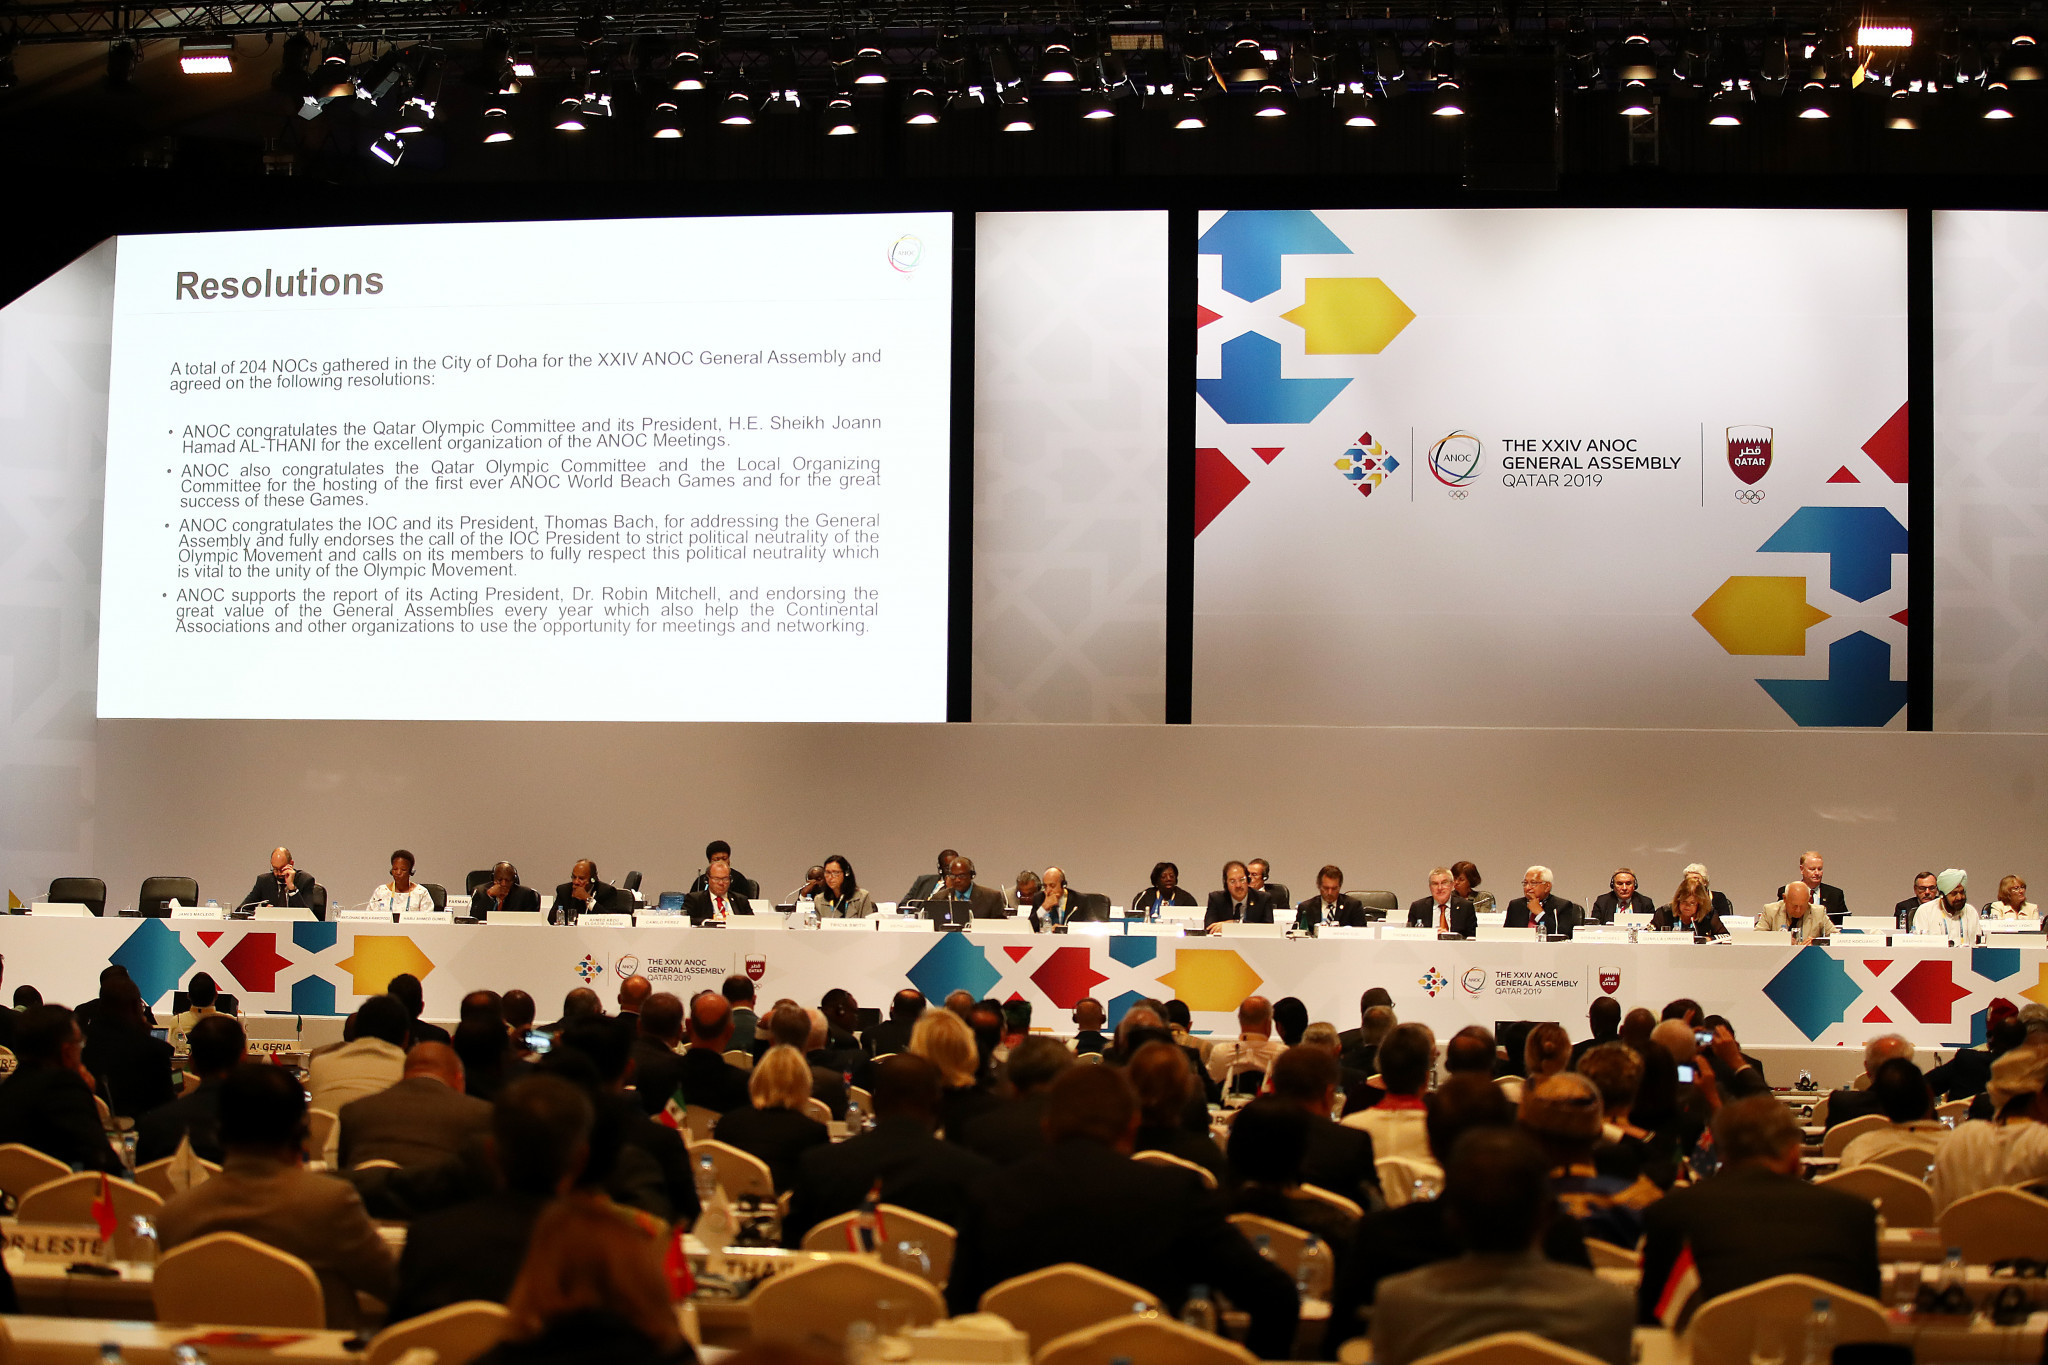 ANOC General Assemblies are notorious for their displays of adulation towards the leadership ©Getty Images